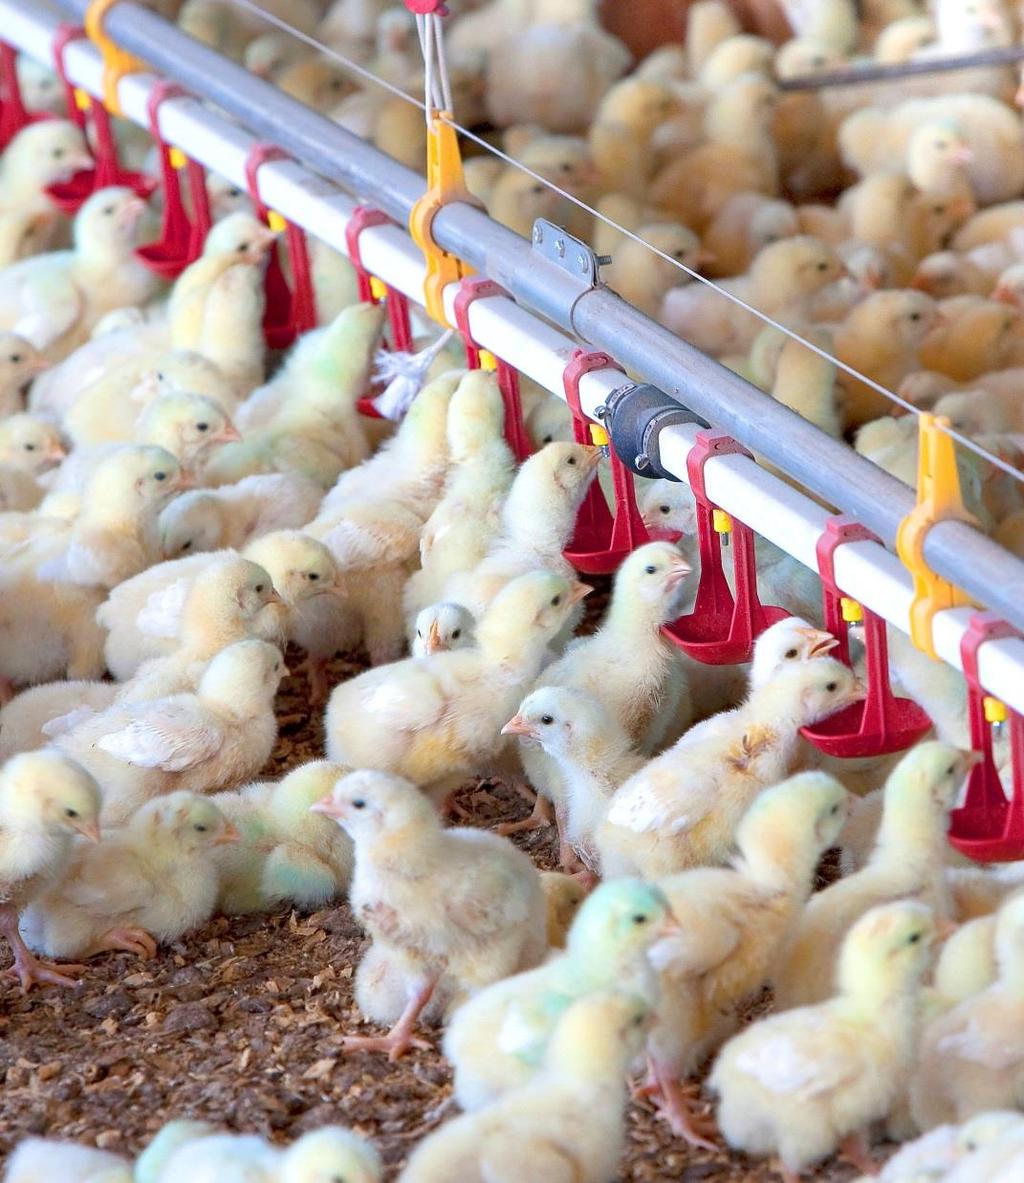 POULTRY ANIMAL WELFARE ASSESSMENT The company has developed and implemented an Animal Welfare assessment at all production units to monitor adoption of recommended practices.